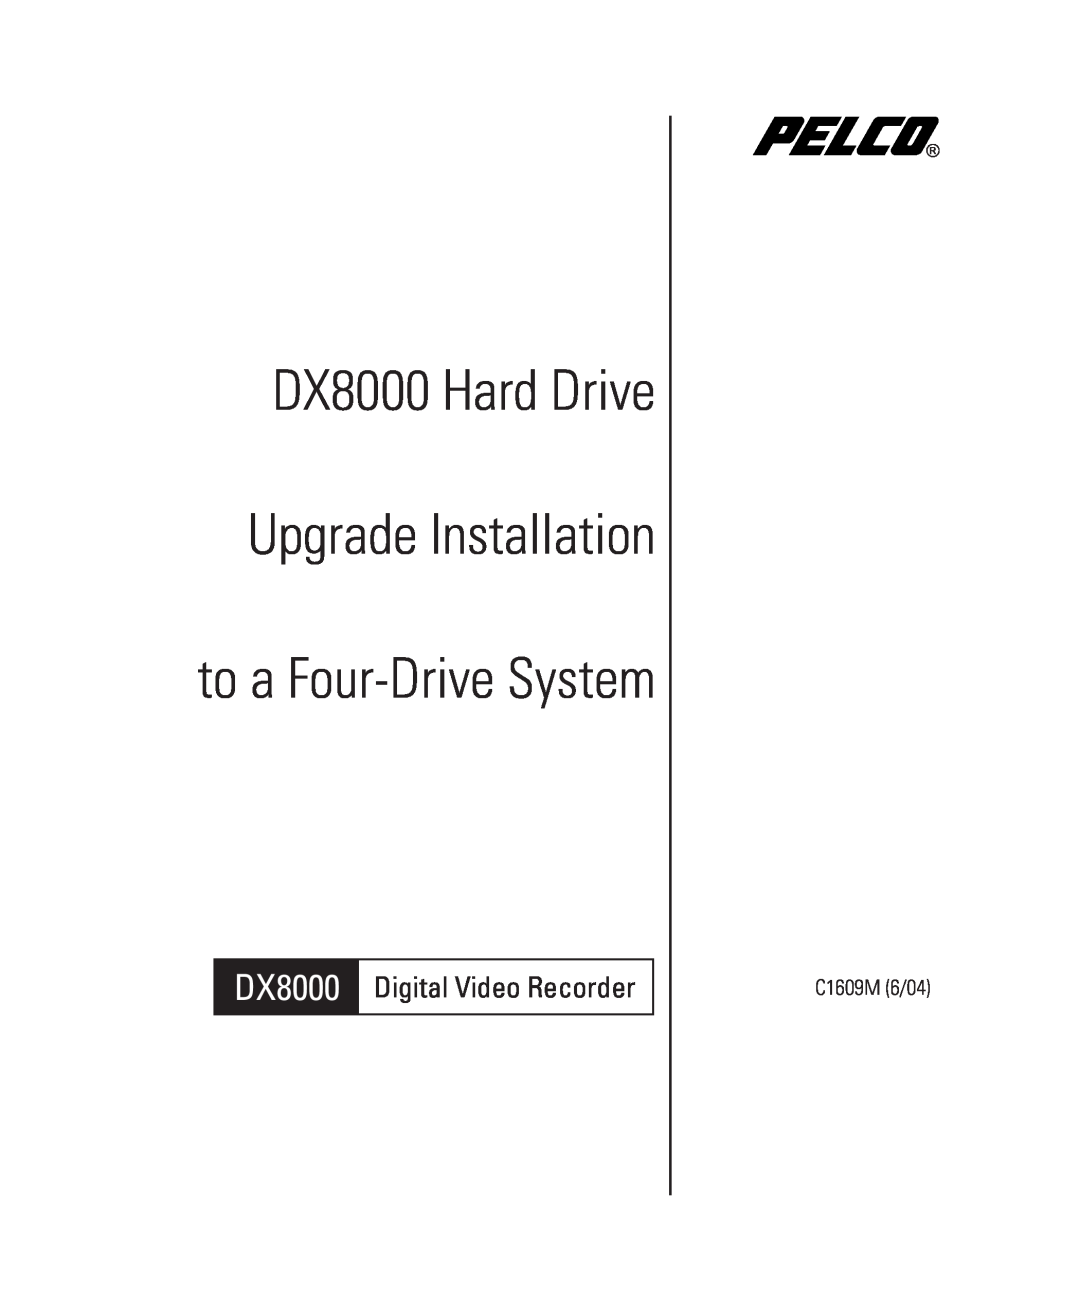 Pelco Dx8000 manual DX8000 Hard Drive Upgrade Installation, to a Two-DriveSystems, Digital Video Recorder, C1607M 6/04 